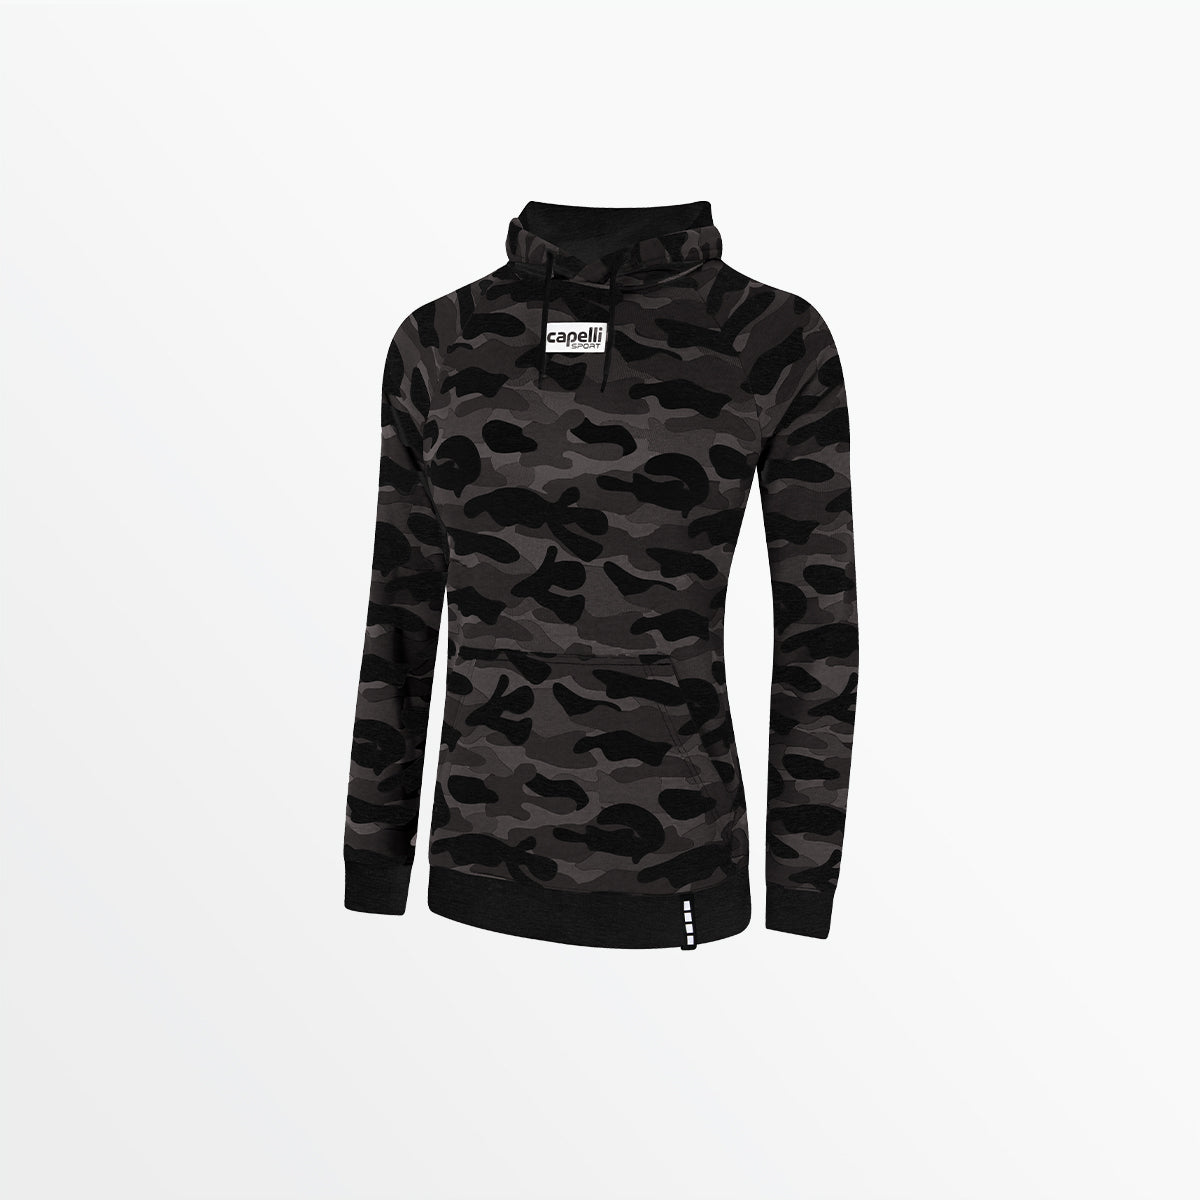 WOMEN'S FRENCH TERRY CAMO PRINT PULLOVER HOODIE